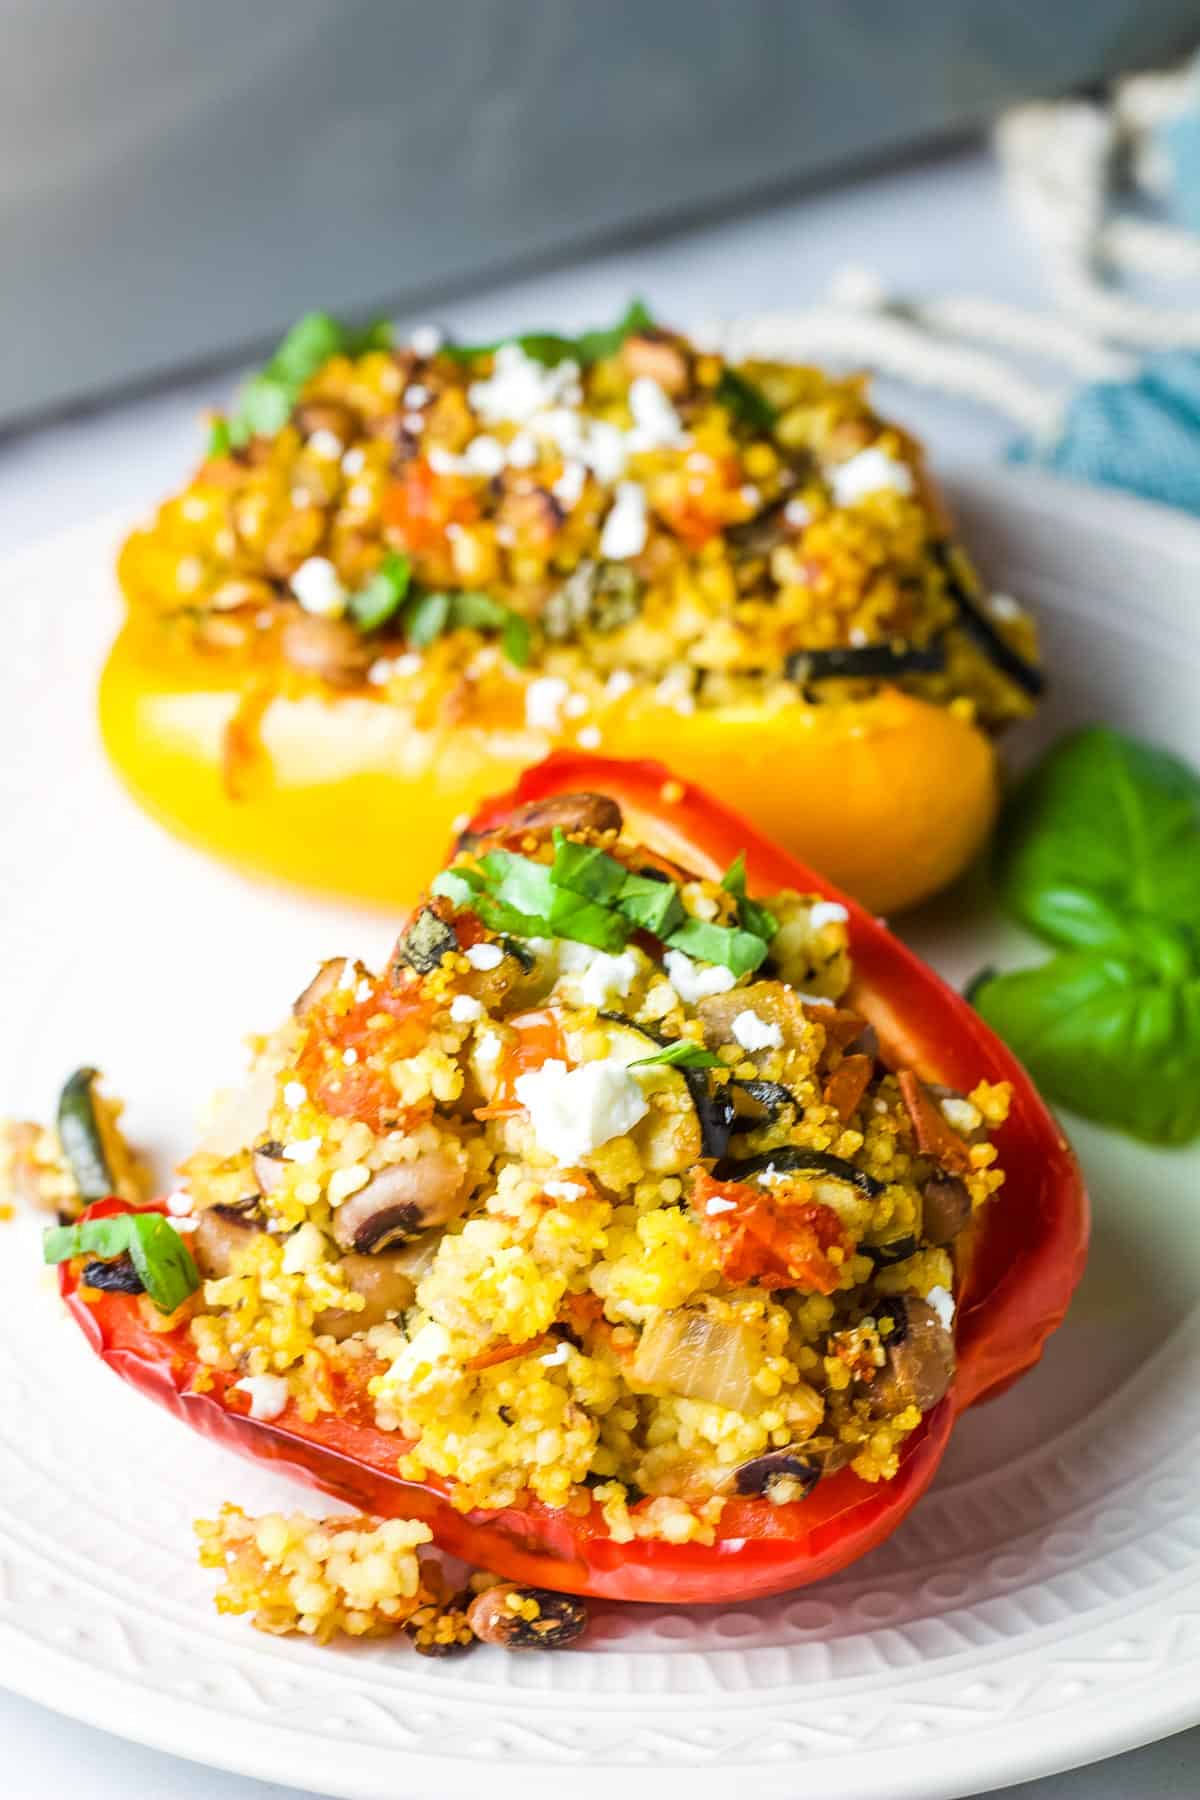 BBQ Bell Peppers filled with Cous Cous